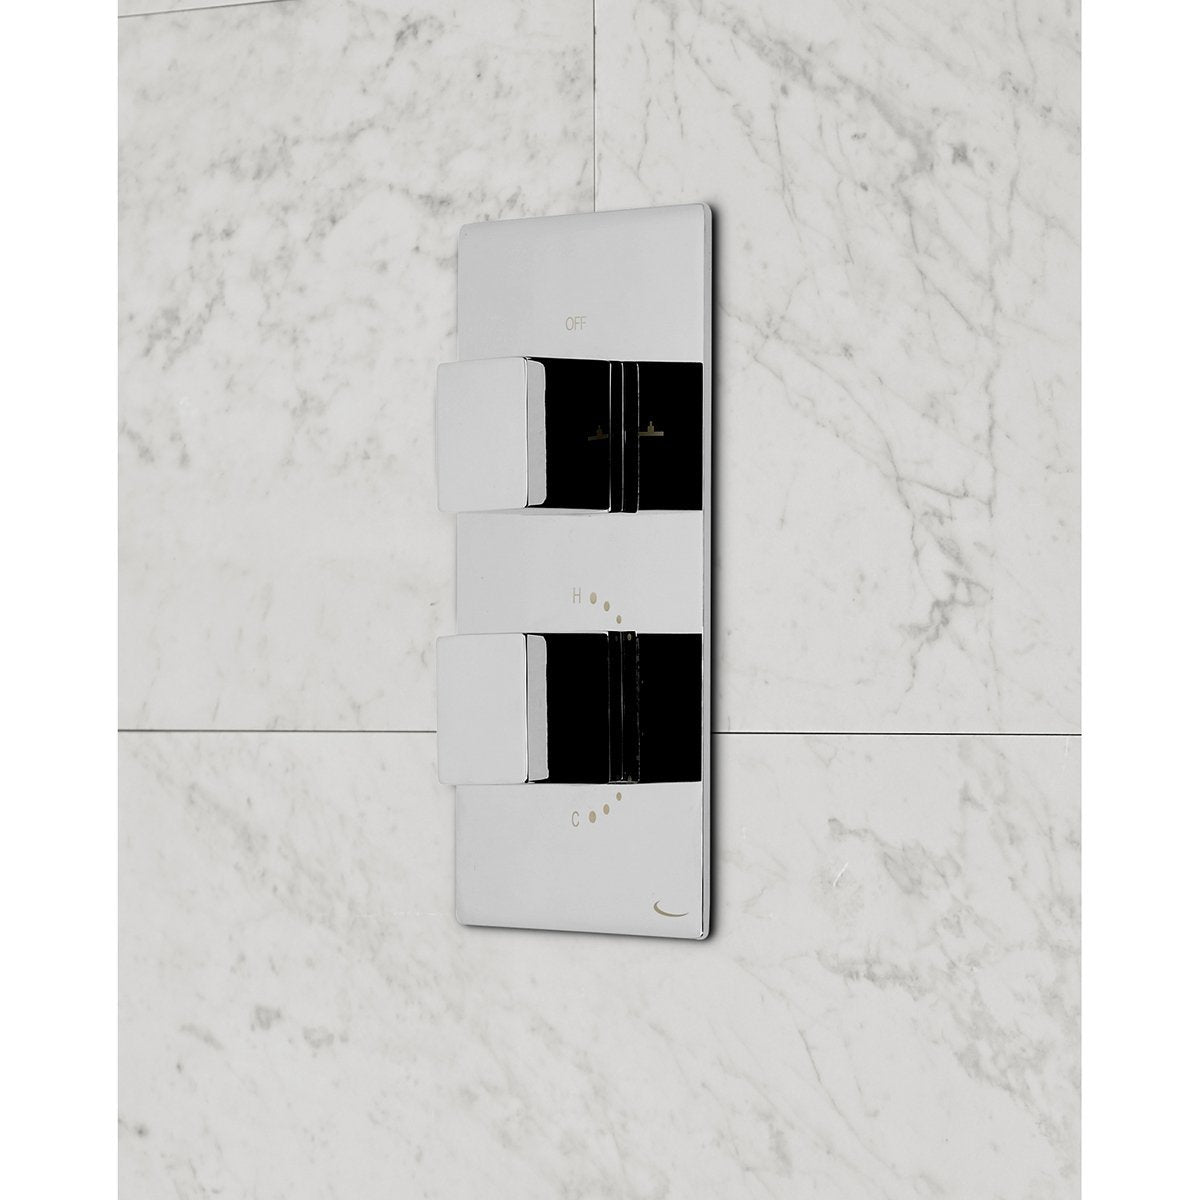 Tavistock Nomad Concealed Two Function Shower - Signature Retail Stores